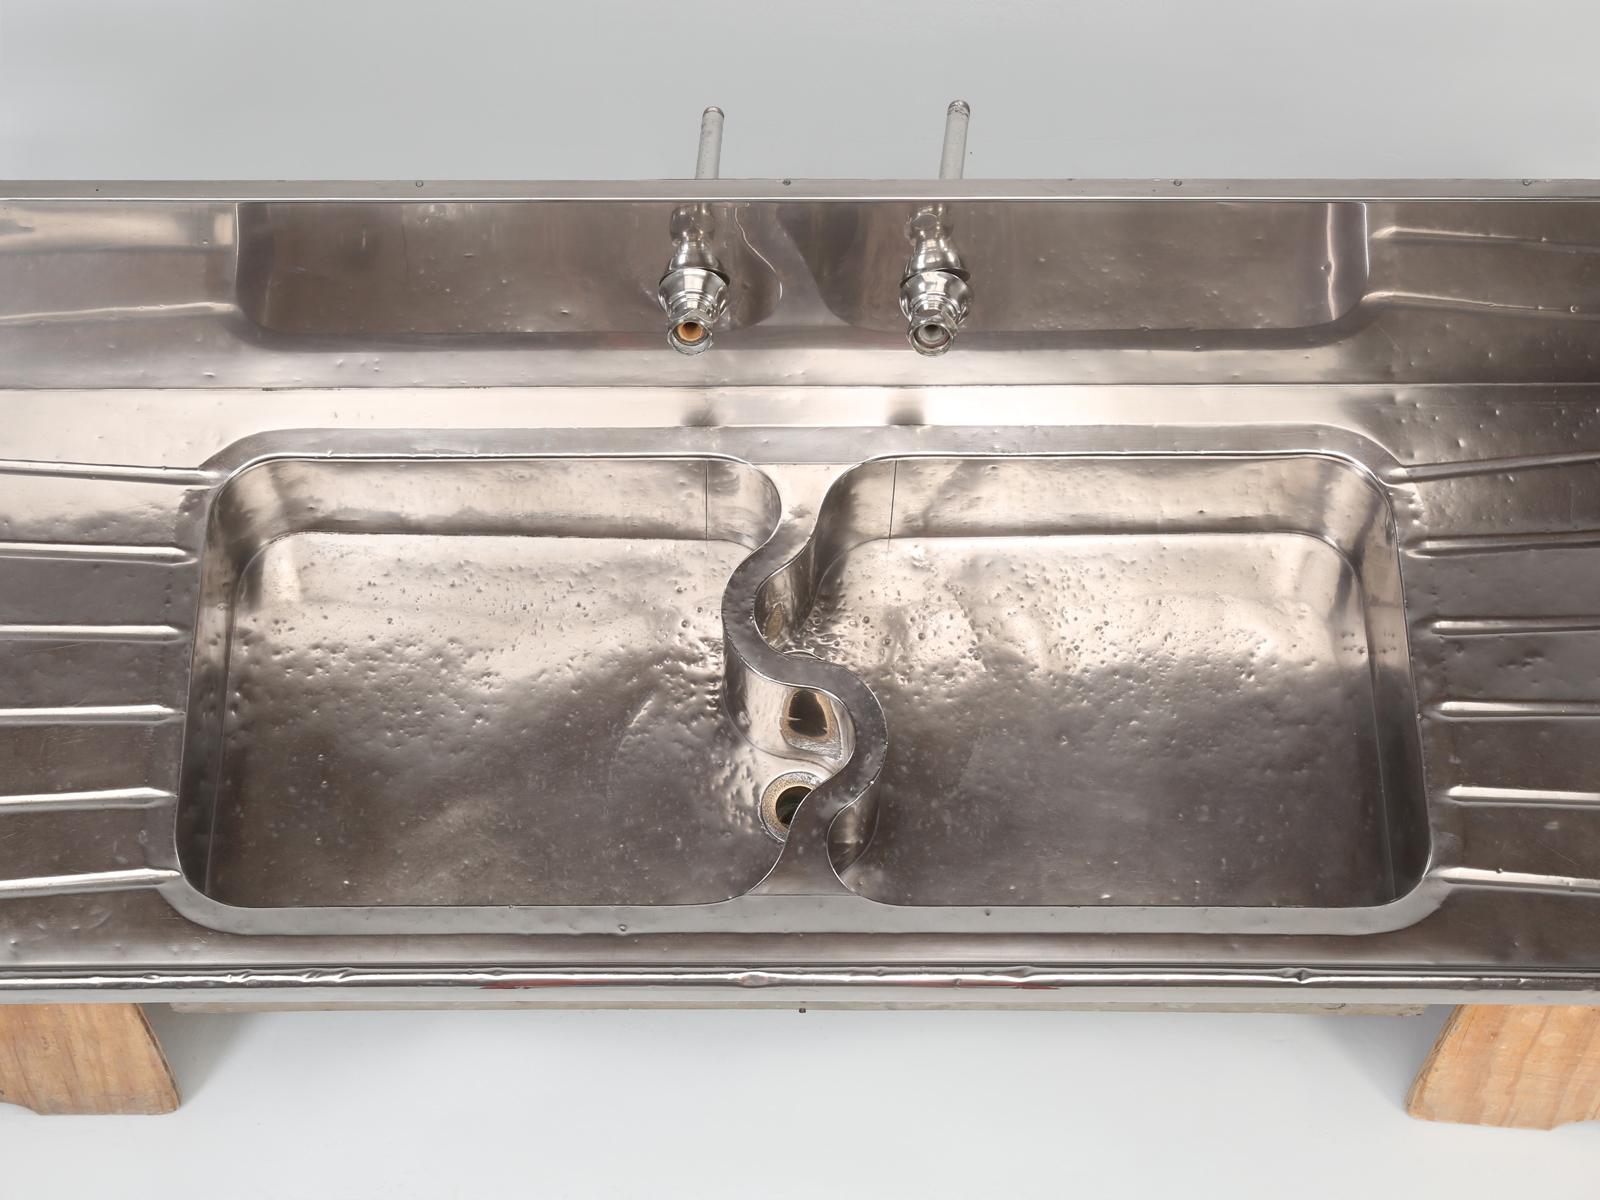 Hand-Crafted Antique German Silver Kitchen or Bar Sink from Chicago, Early 1900s